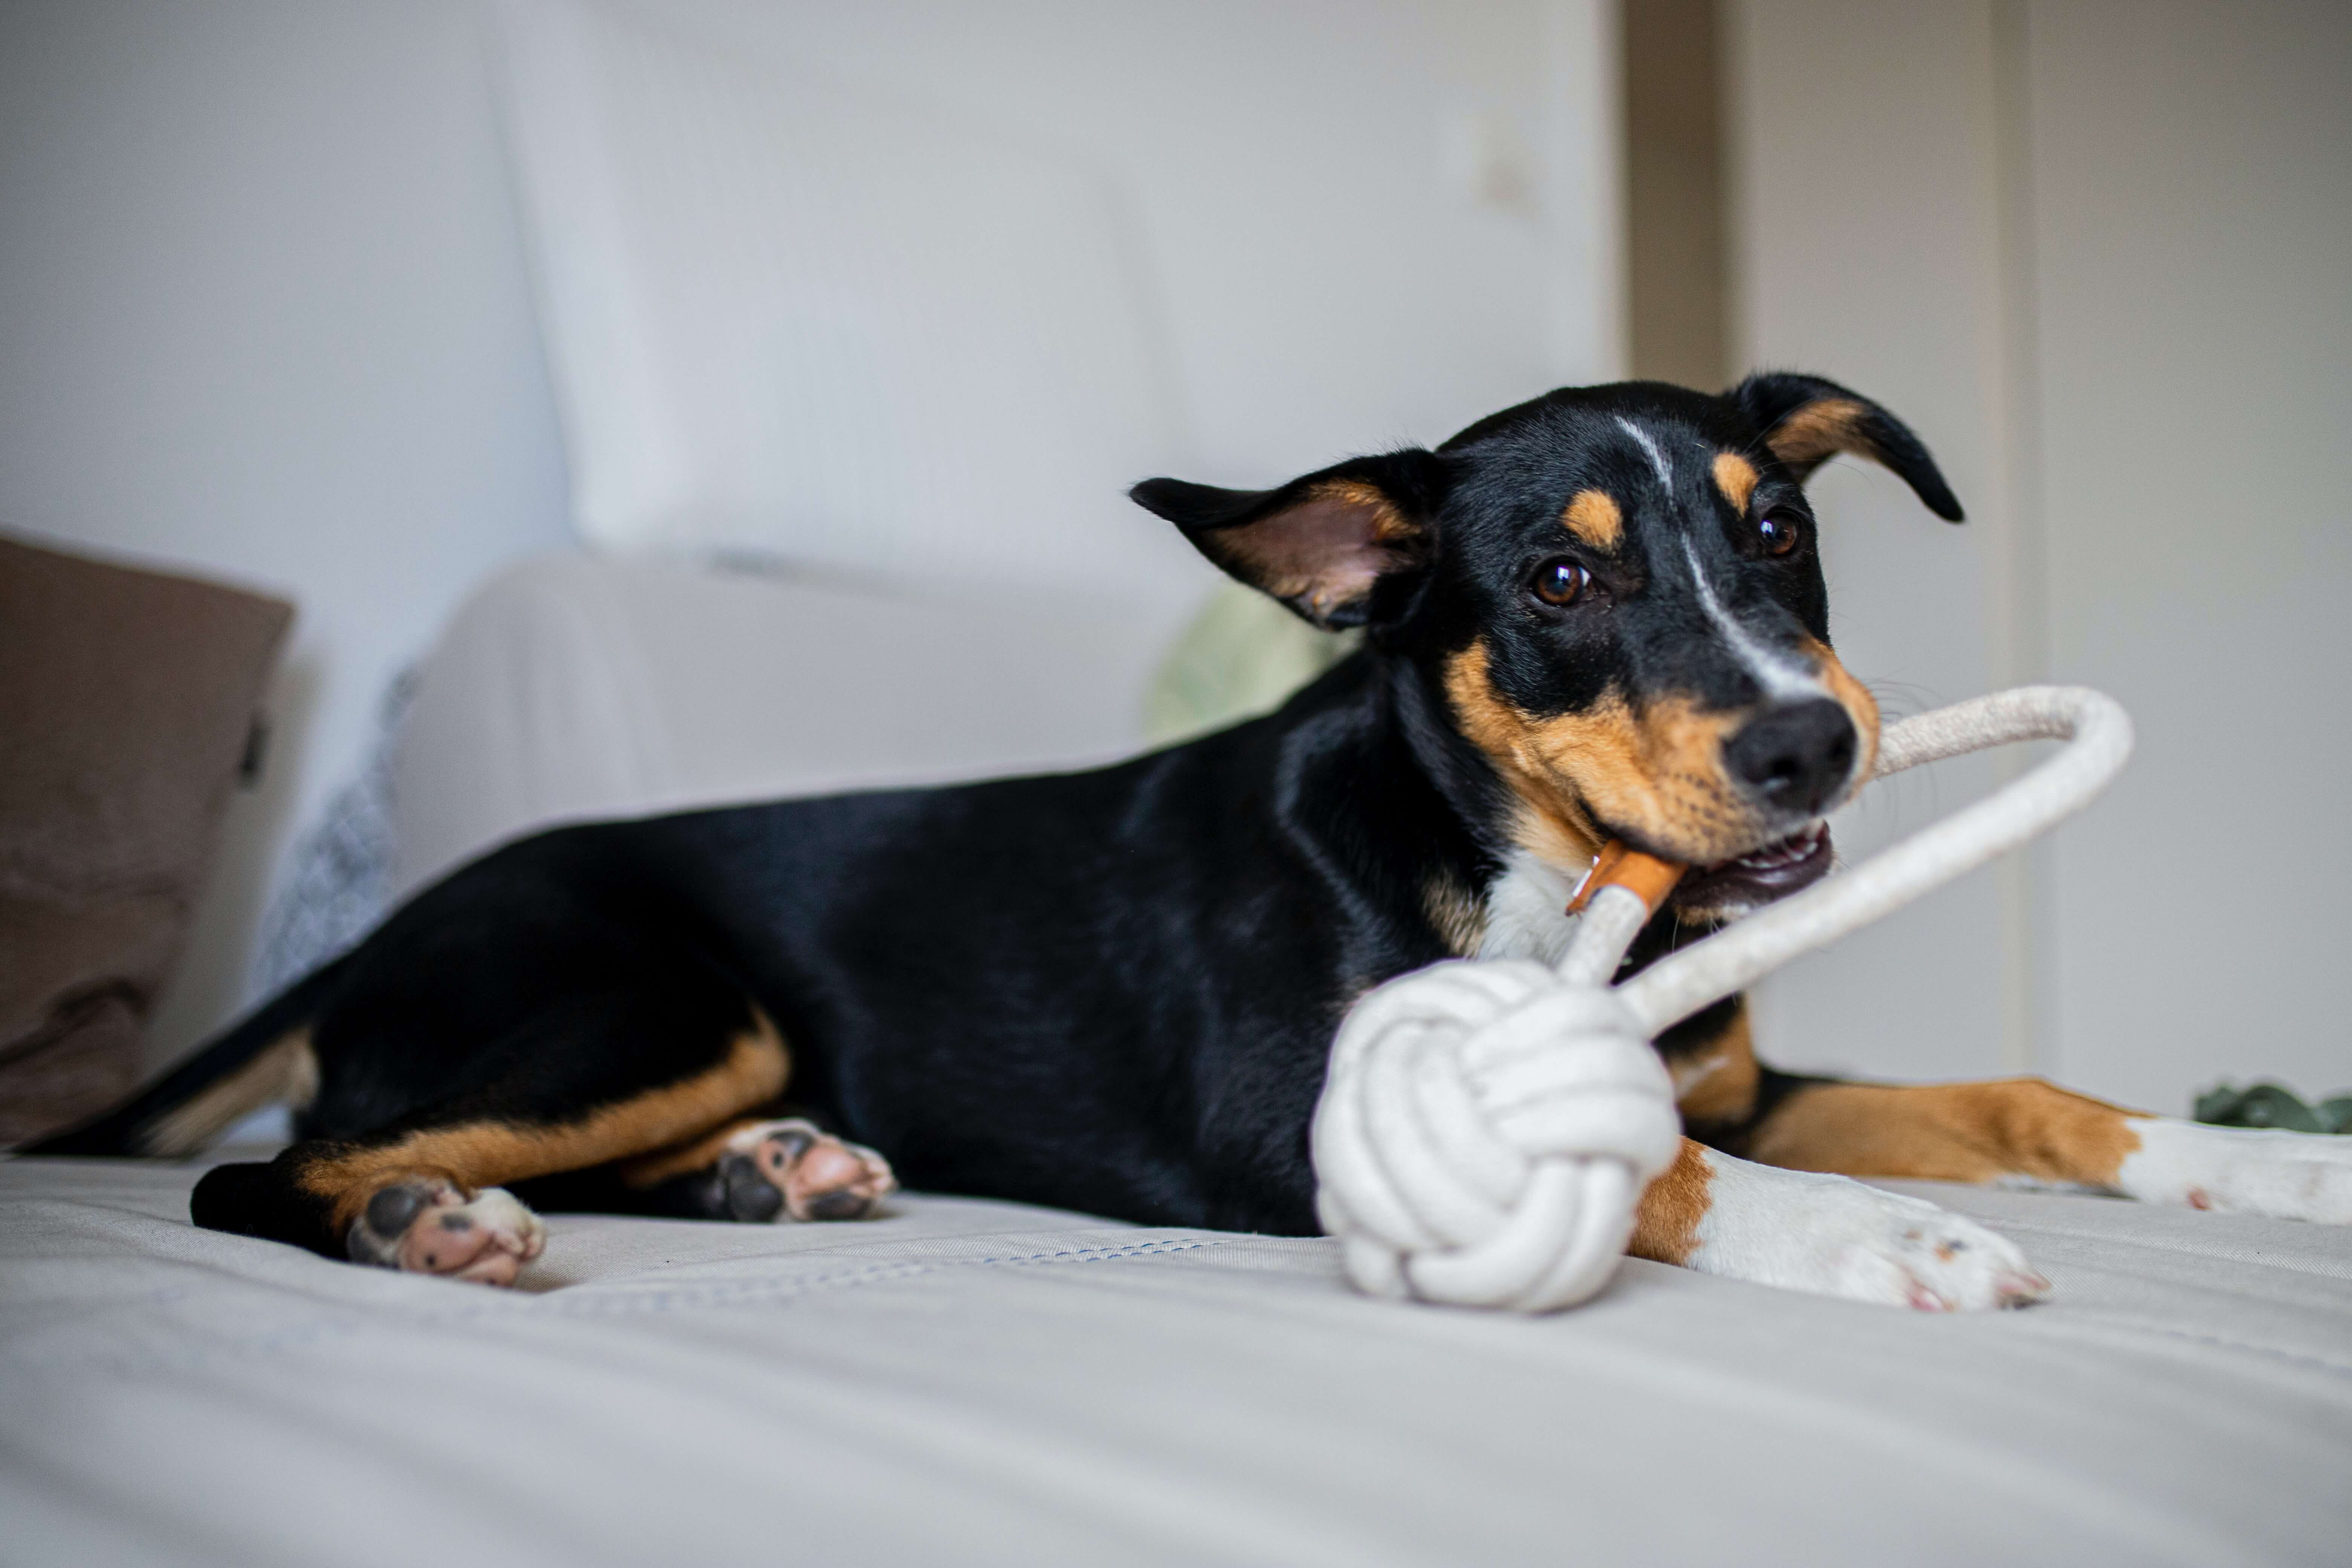 A dog chewing on a rope toy